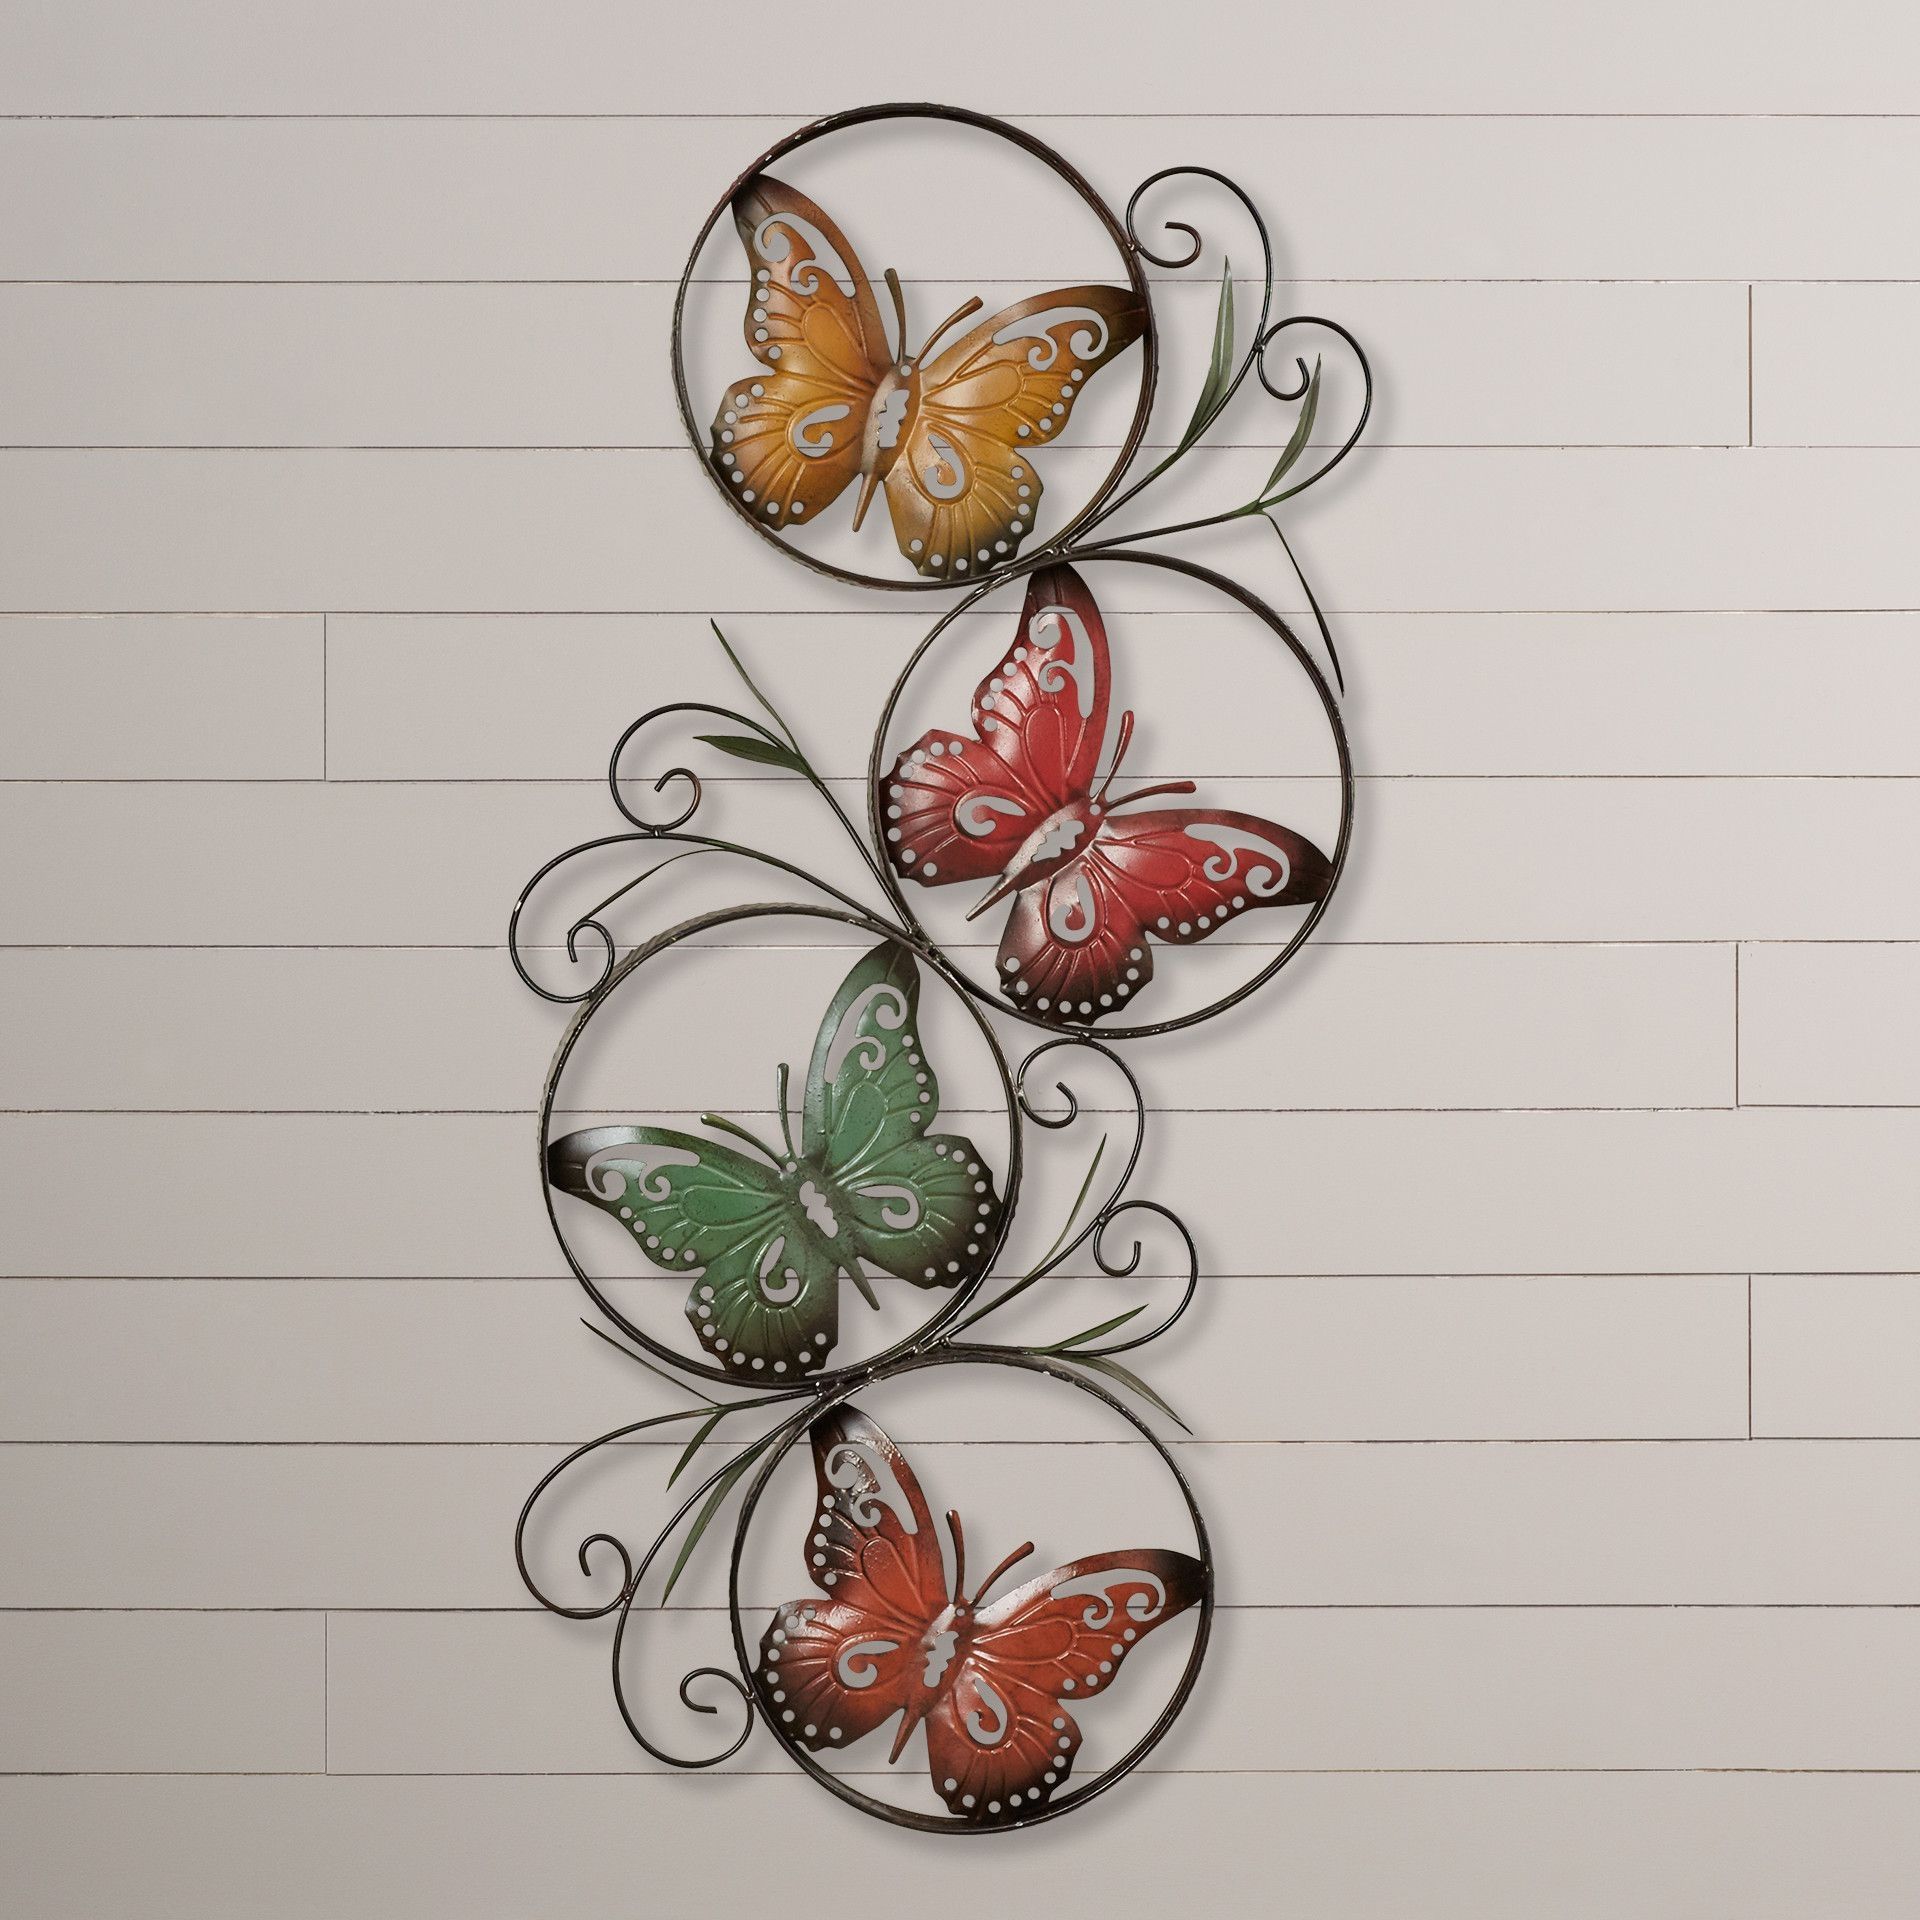 Metal Butterfly Wall Decor You'll Love In 2021 – Visualhunt Intended For Small Metal Wall Art (View 1 of 15)